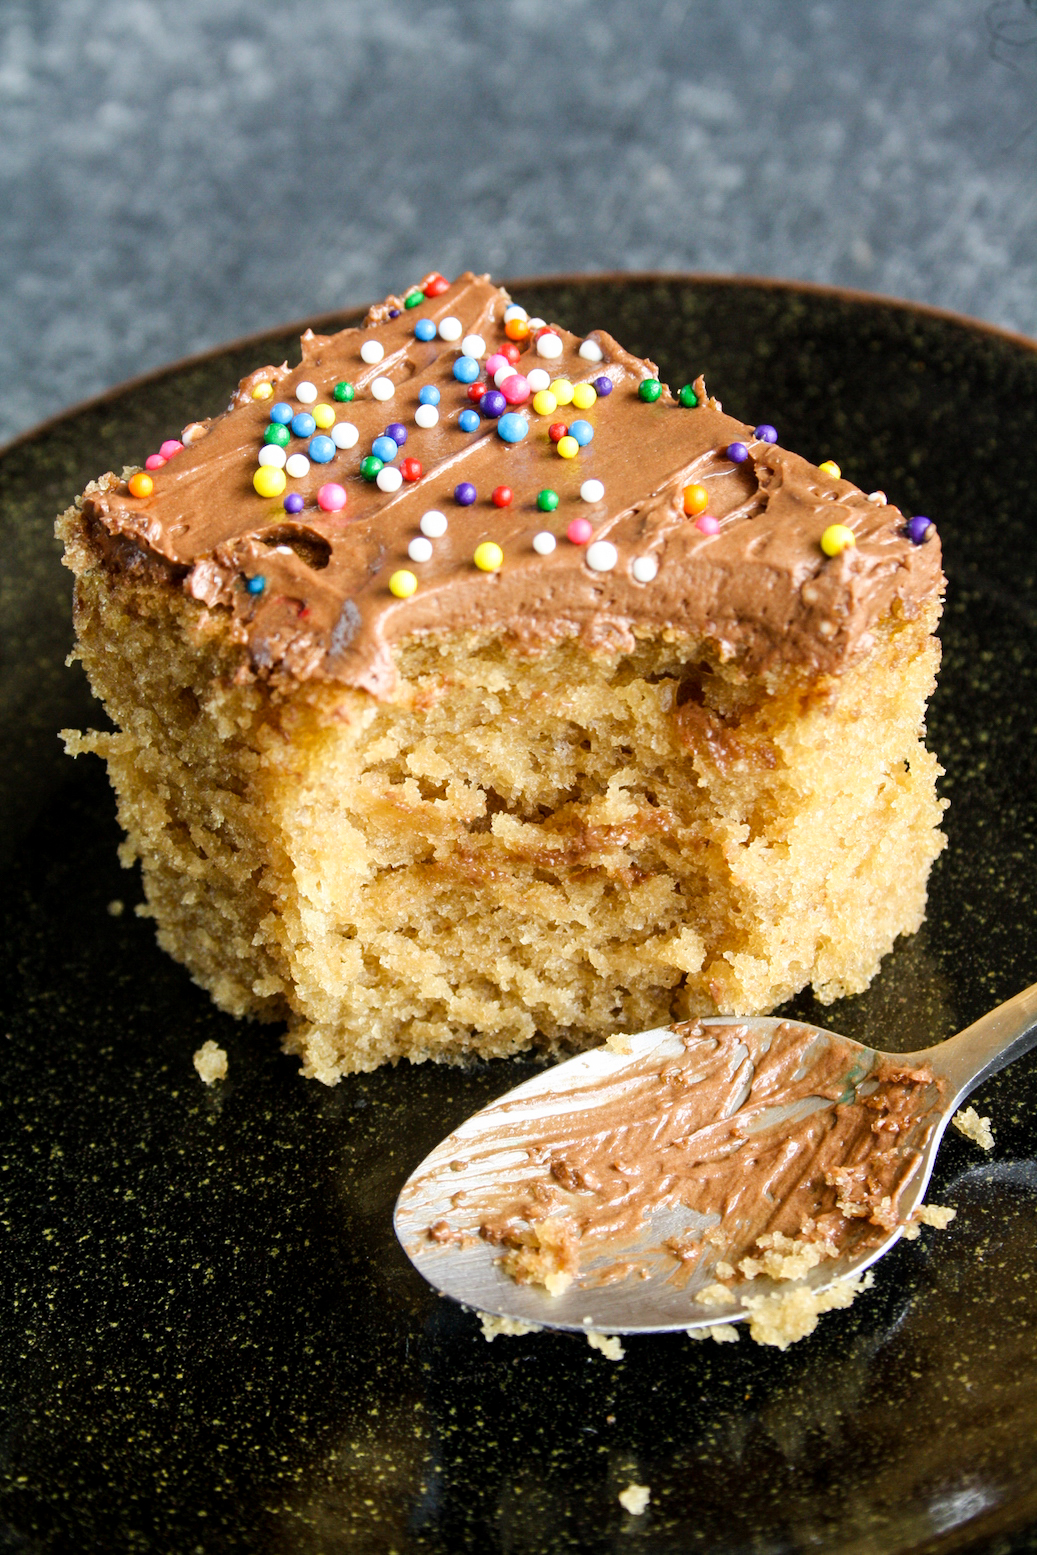 Super moist and easy peanut butter cake frosted with creamy whipped chocolate ganache